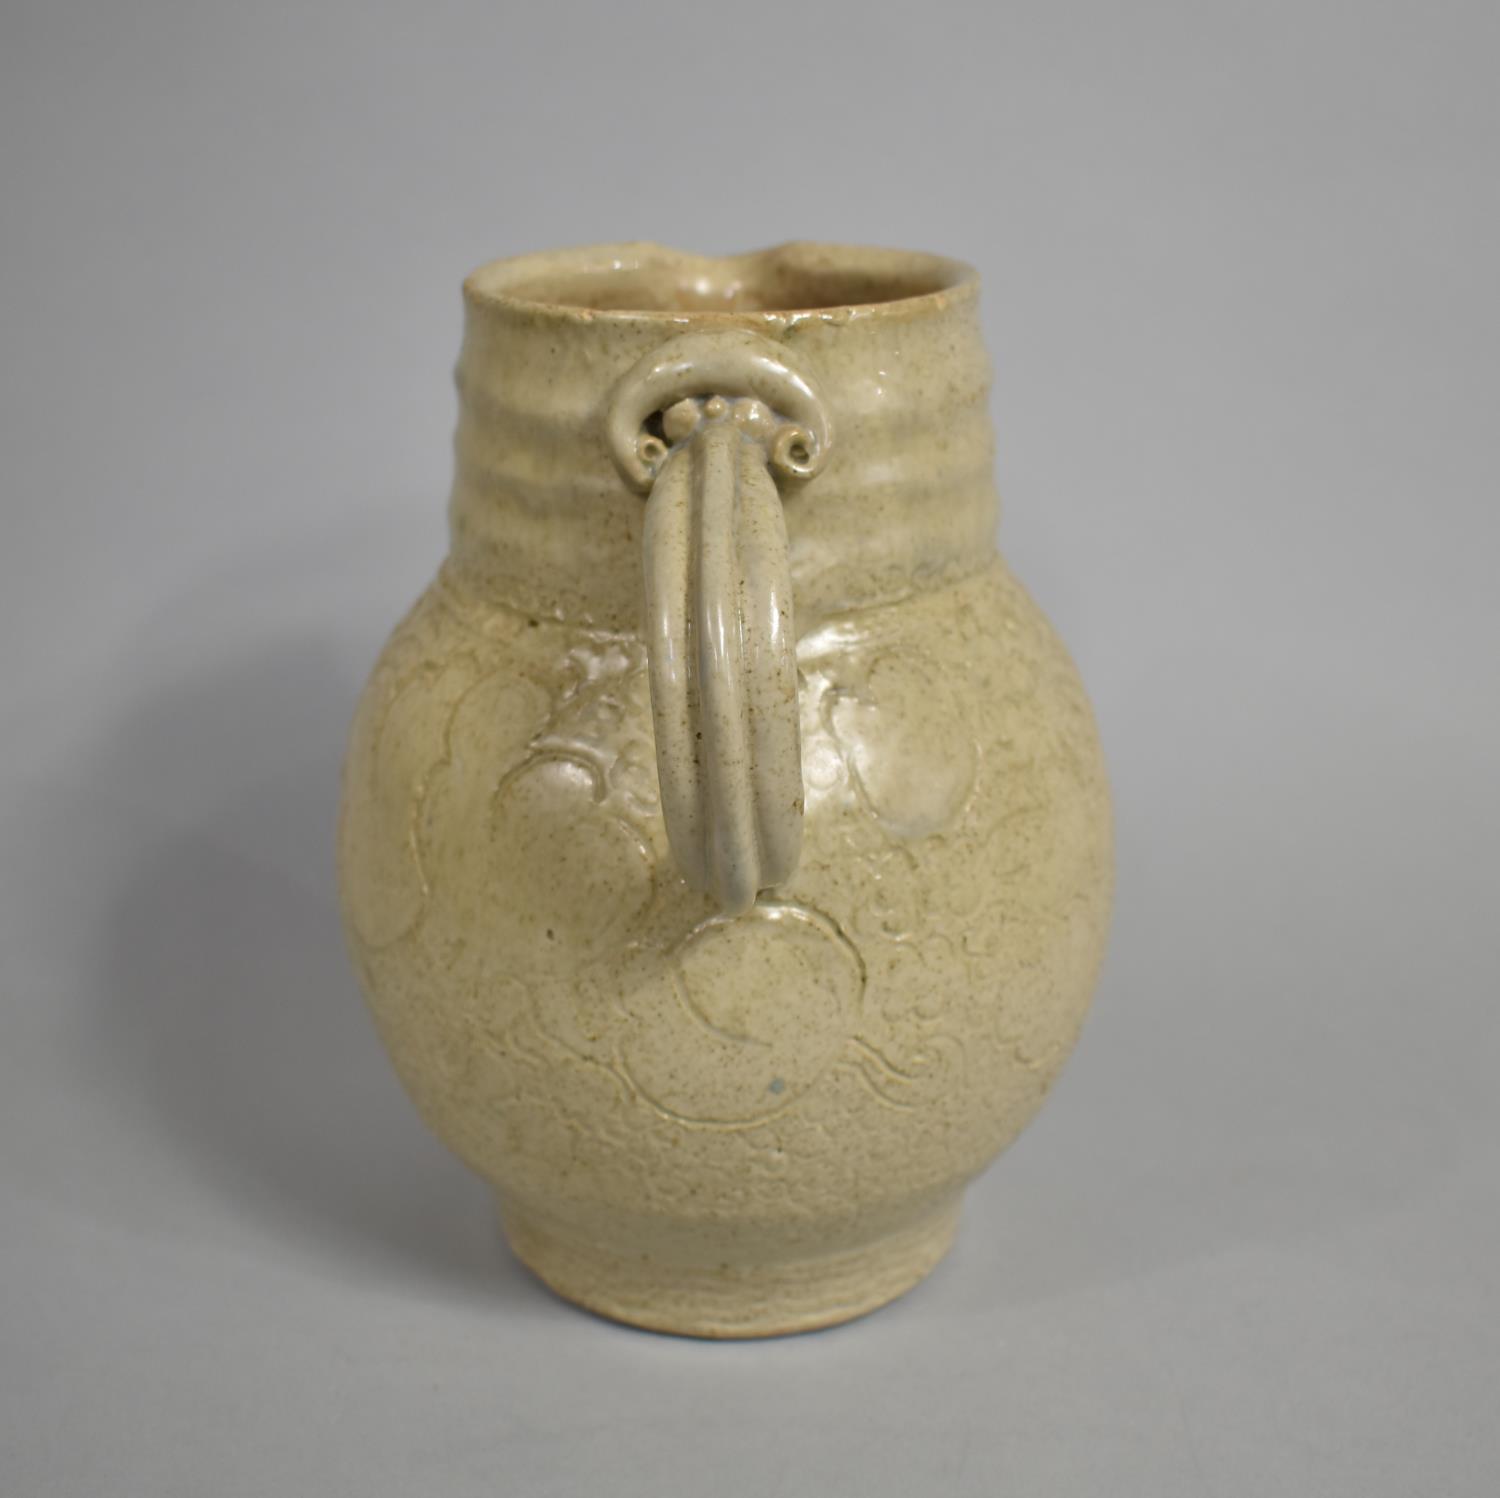 An Oxshott Pottery Stoneware Jug with Incised Bird Decoration, 21cm high - Image 2 of 4